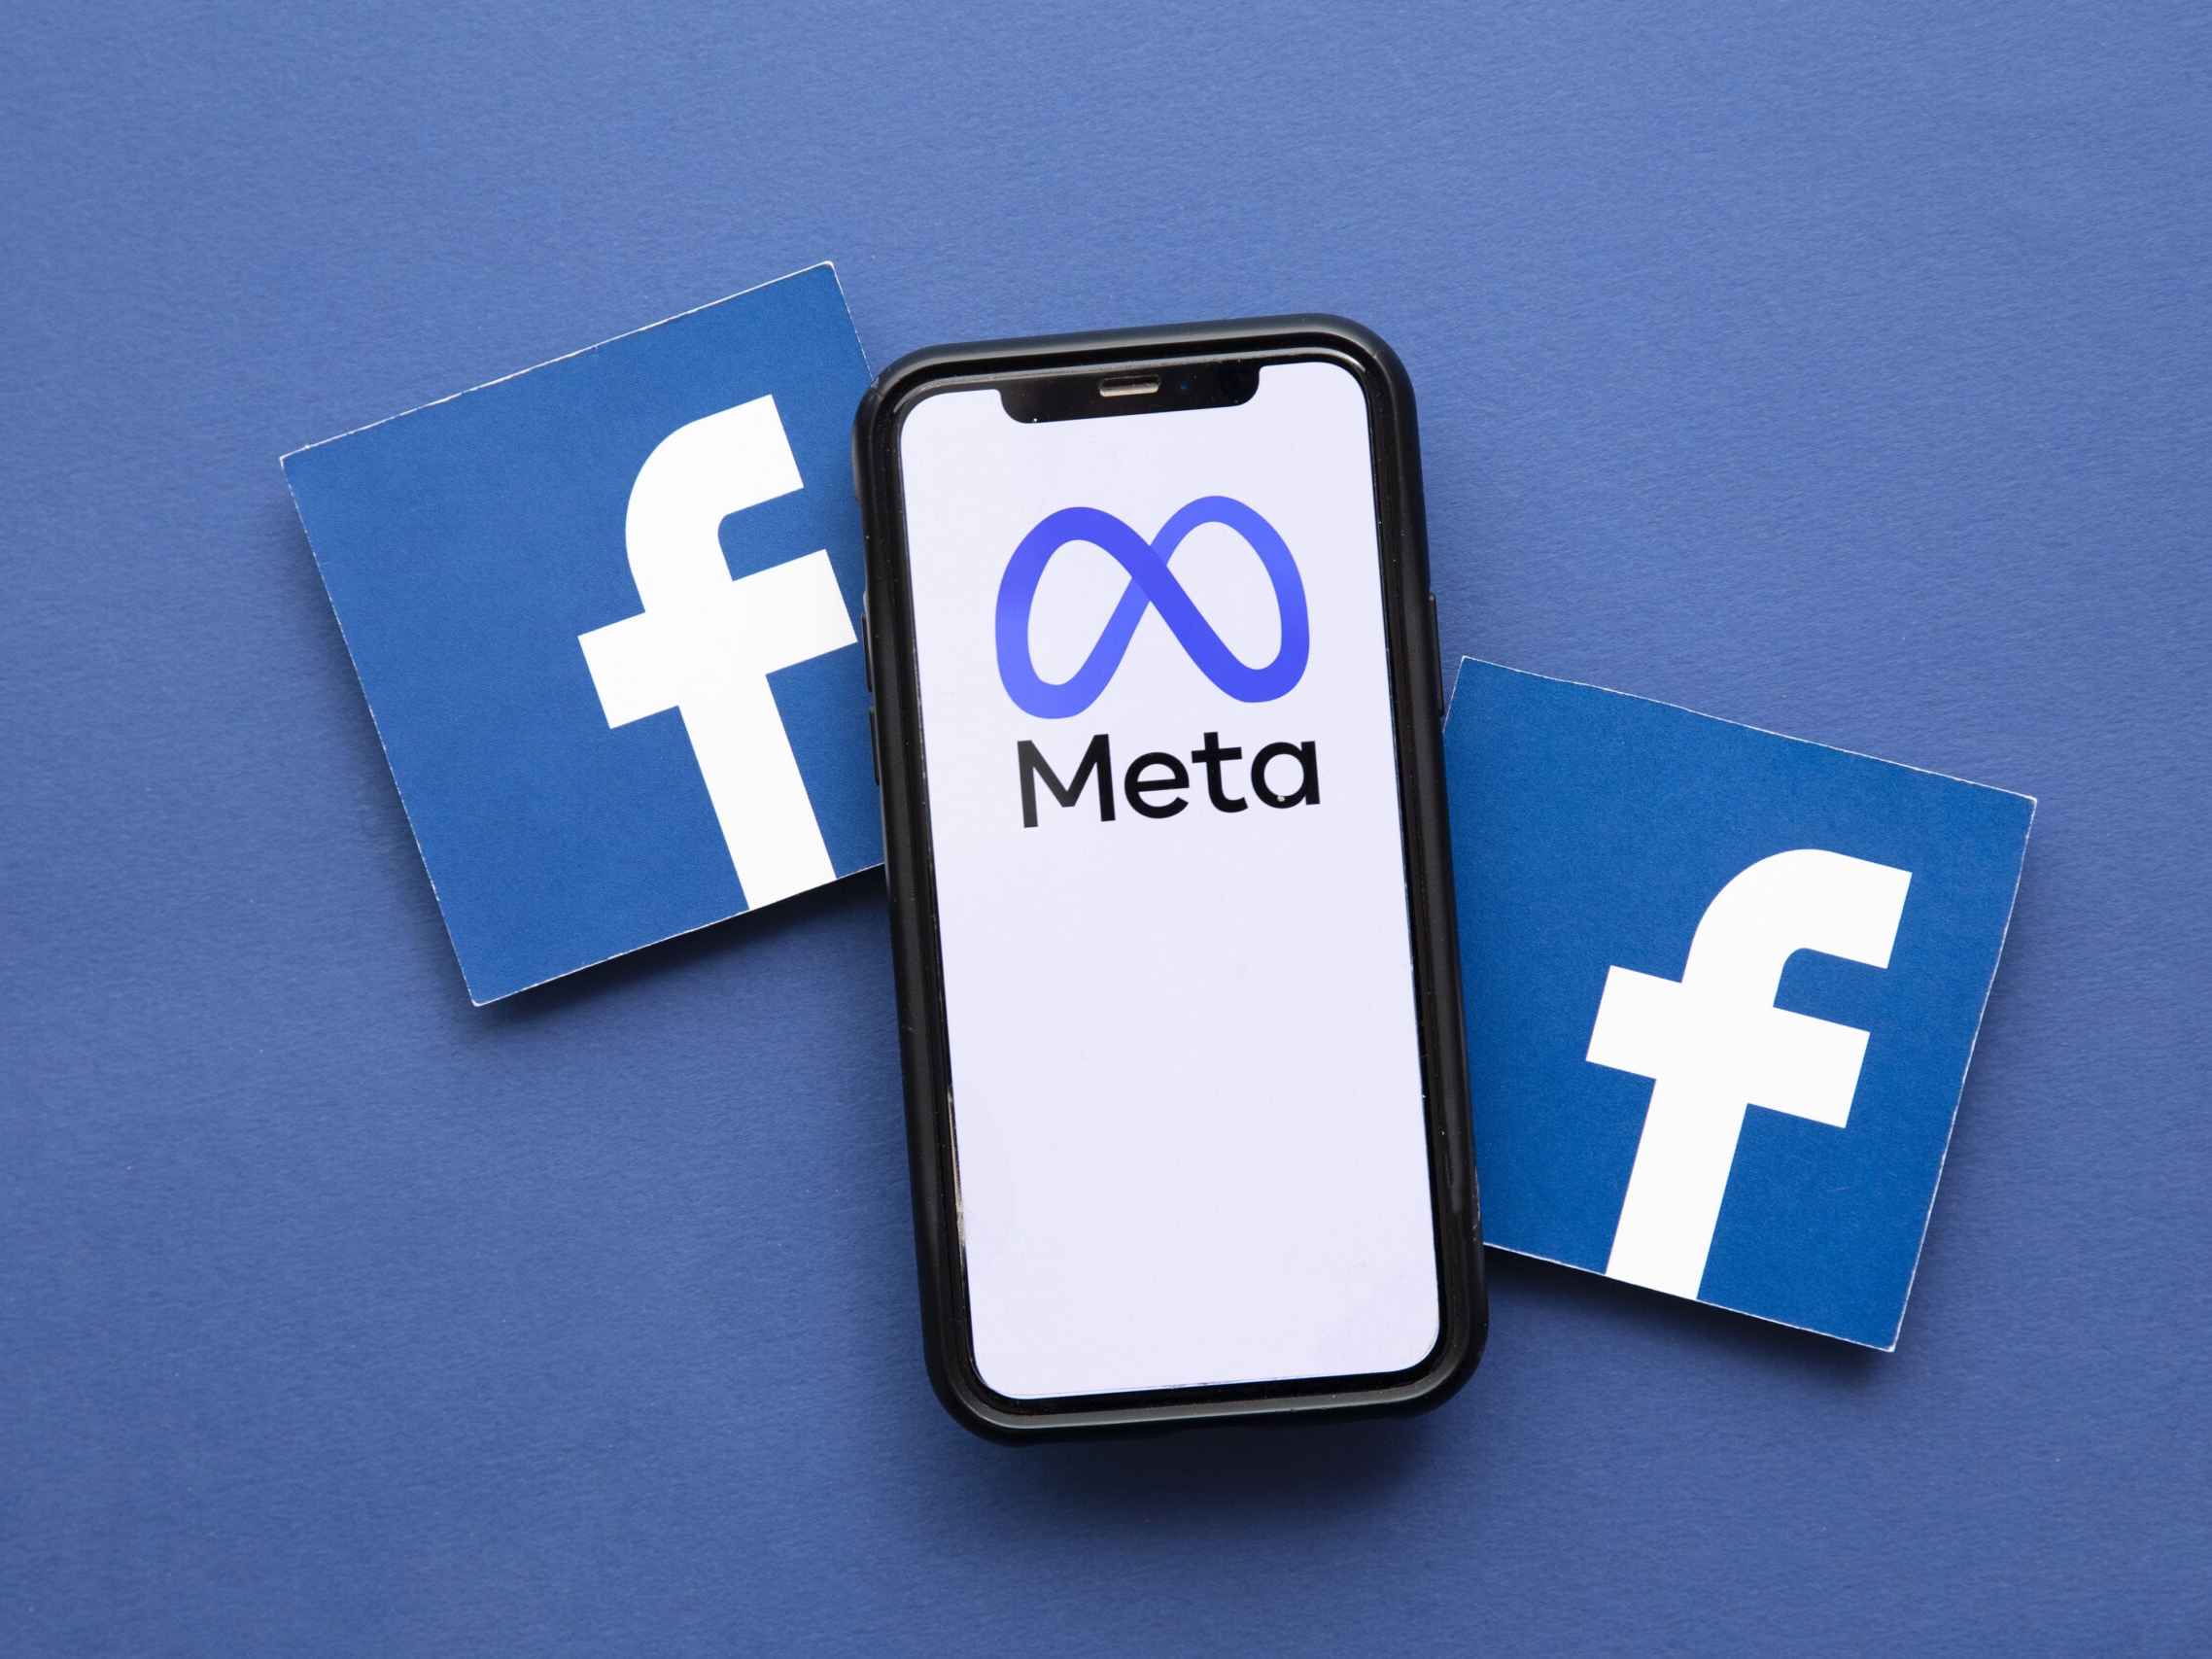 Facebook illustration: Facebook social media company changes its corporate name to Meta.